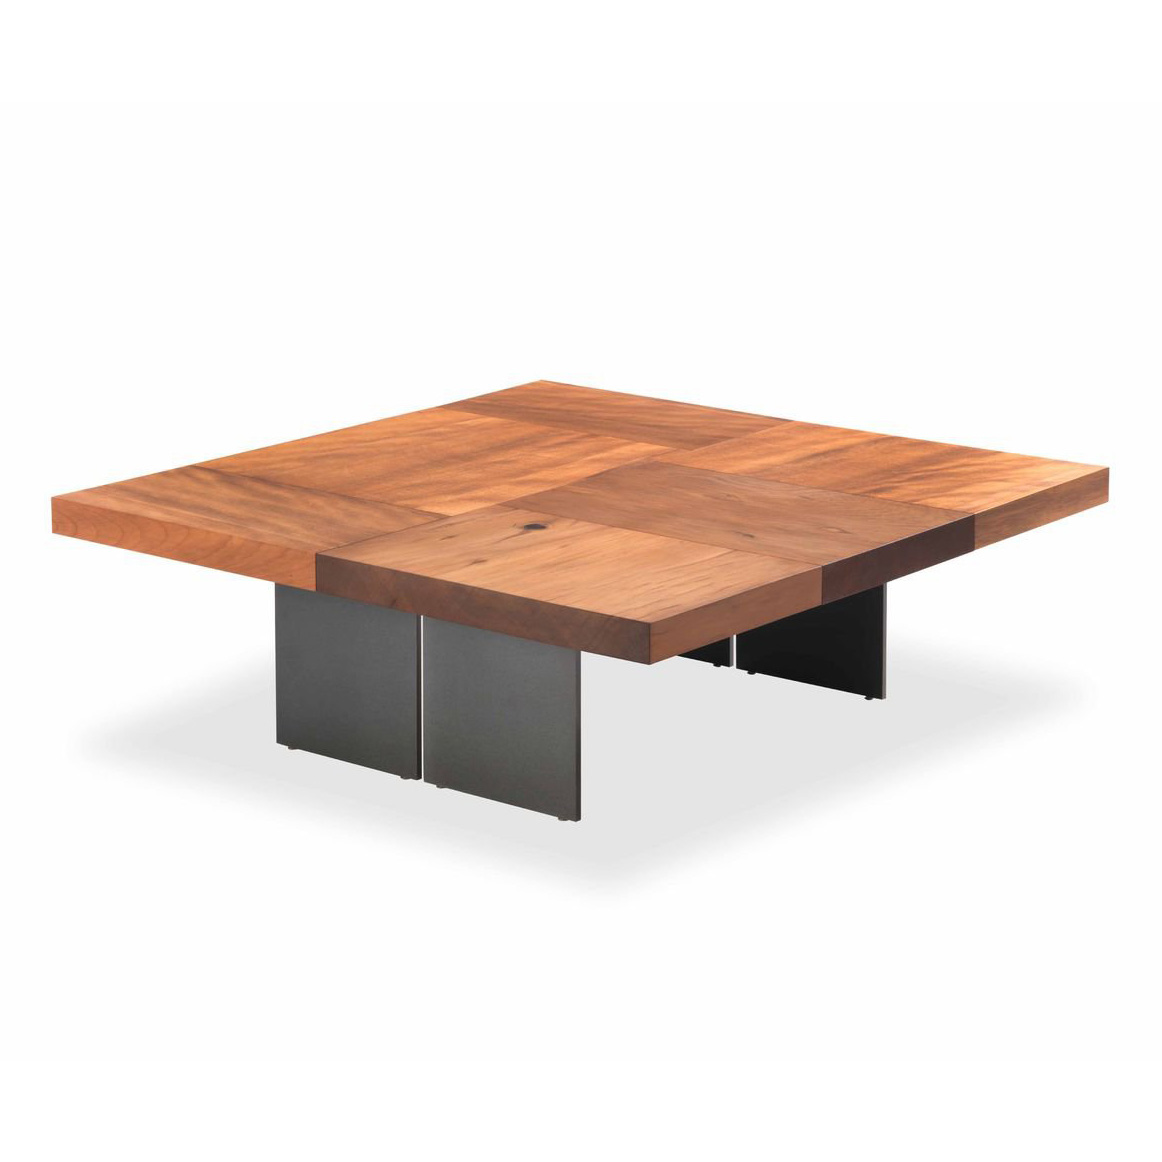 Riva 1920 Auckland Block Wooden Coffee Table Contemporary